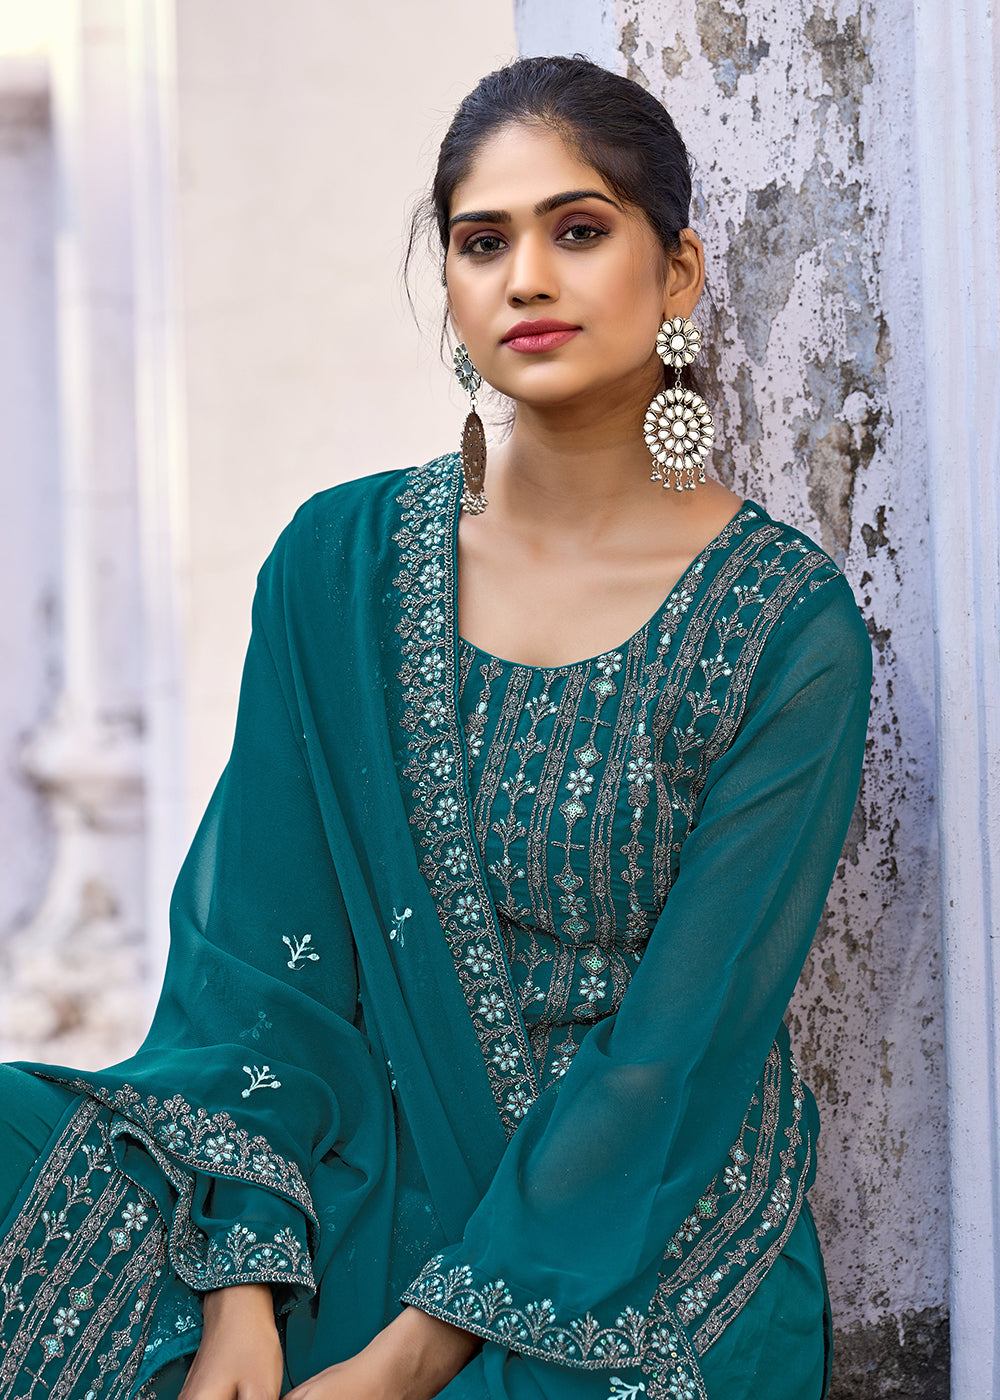 Buy Now Thread & Sequins Embroidered Teal Palazzo Salwar Suit Online in USA, UK, Canada, Germany, Australia & Worldwide at Empress Clothing.